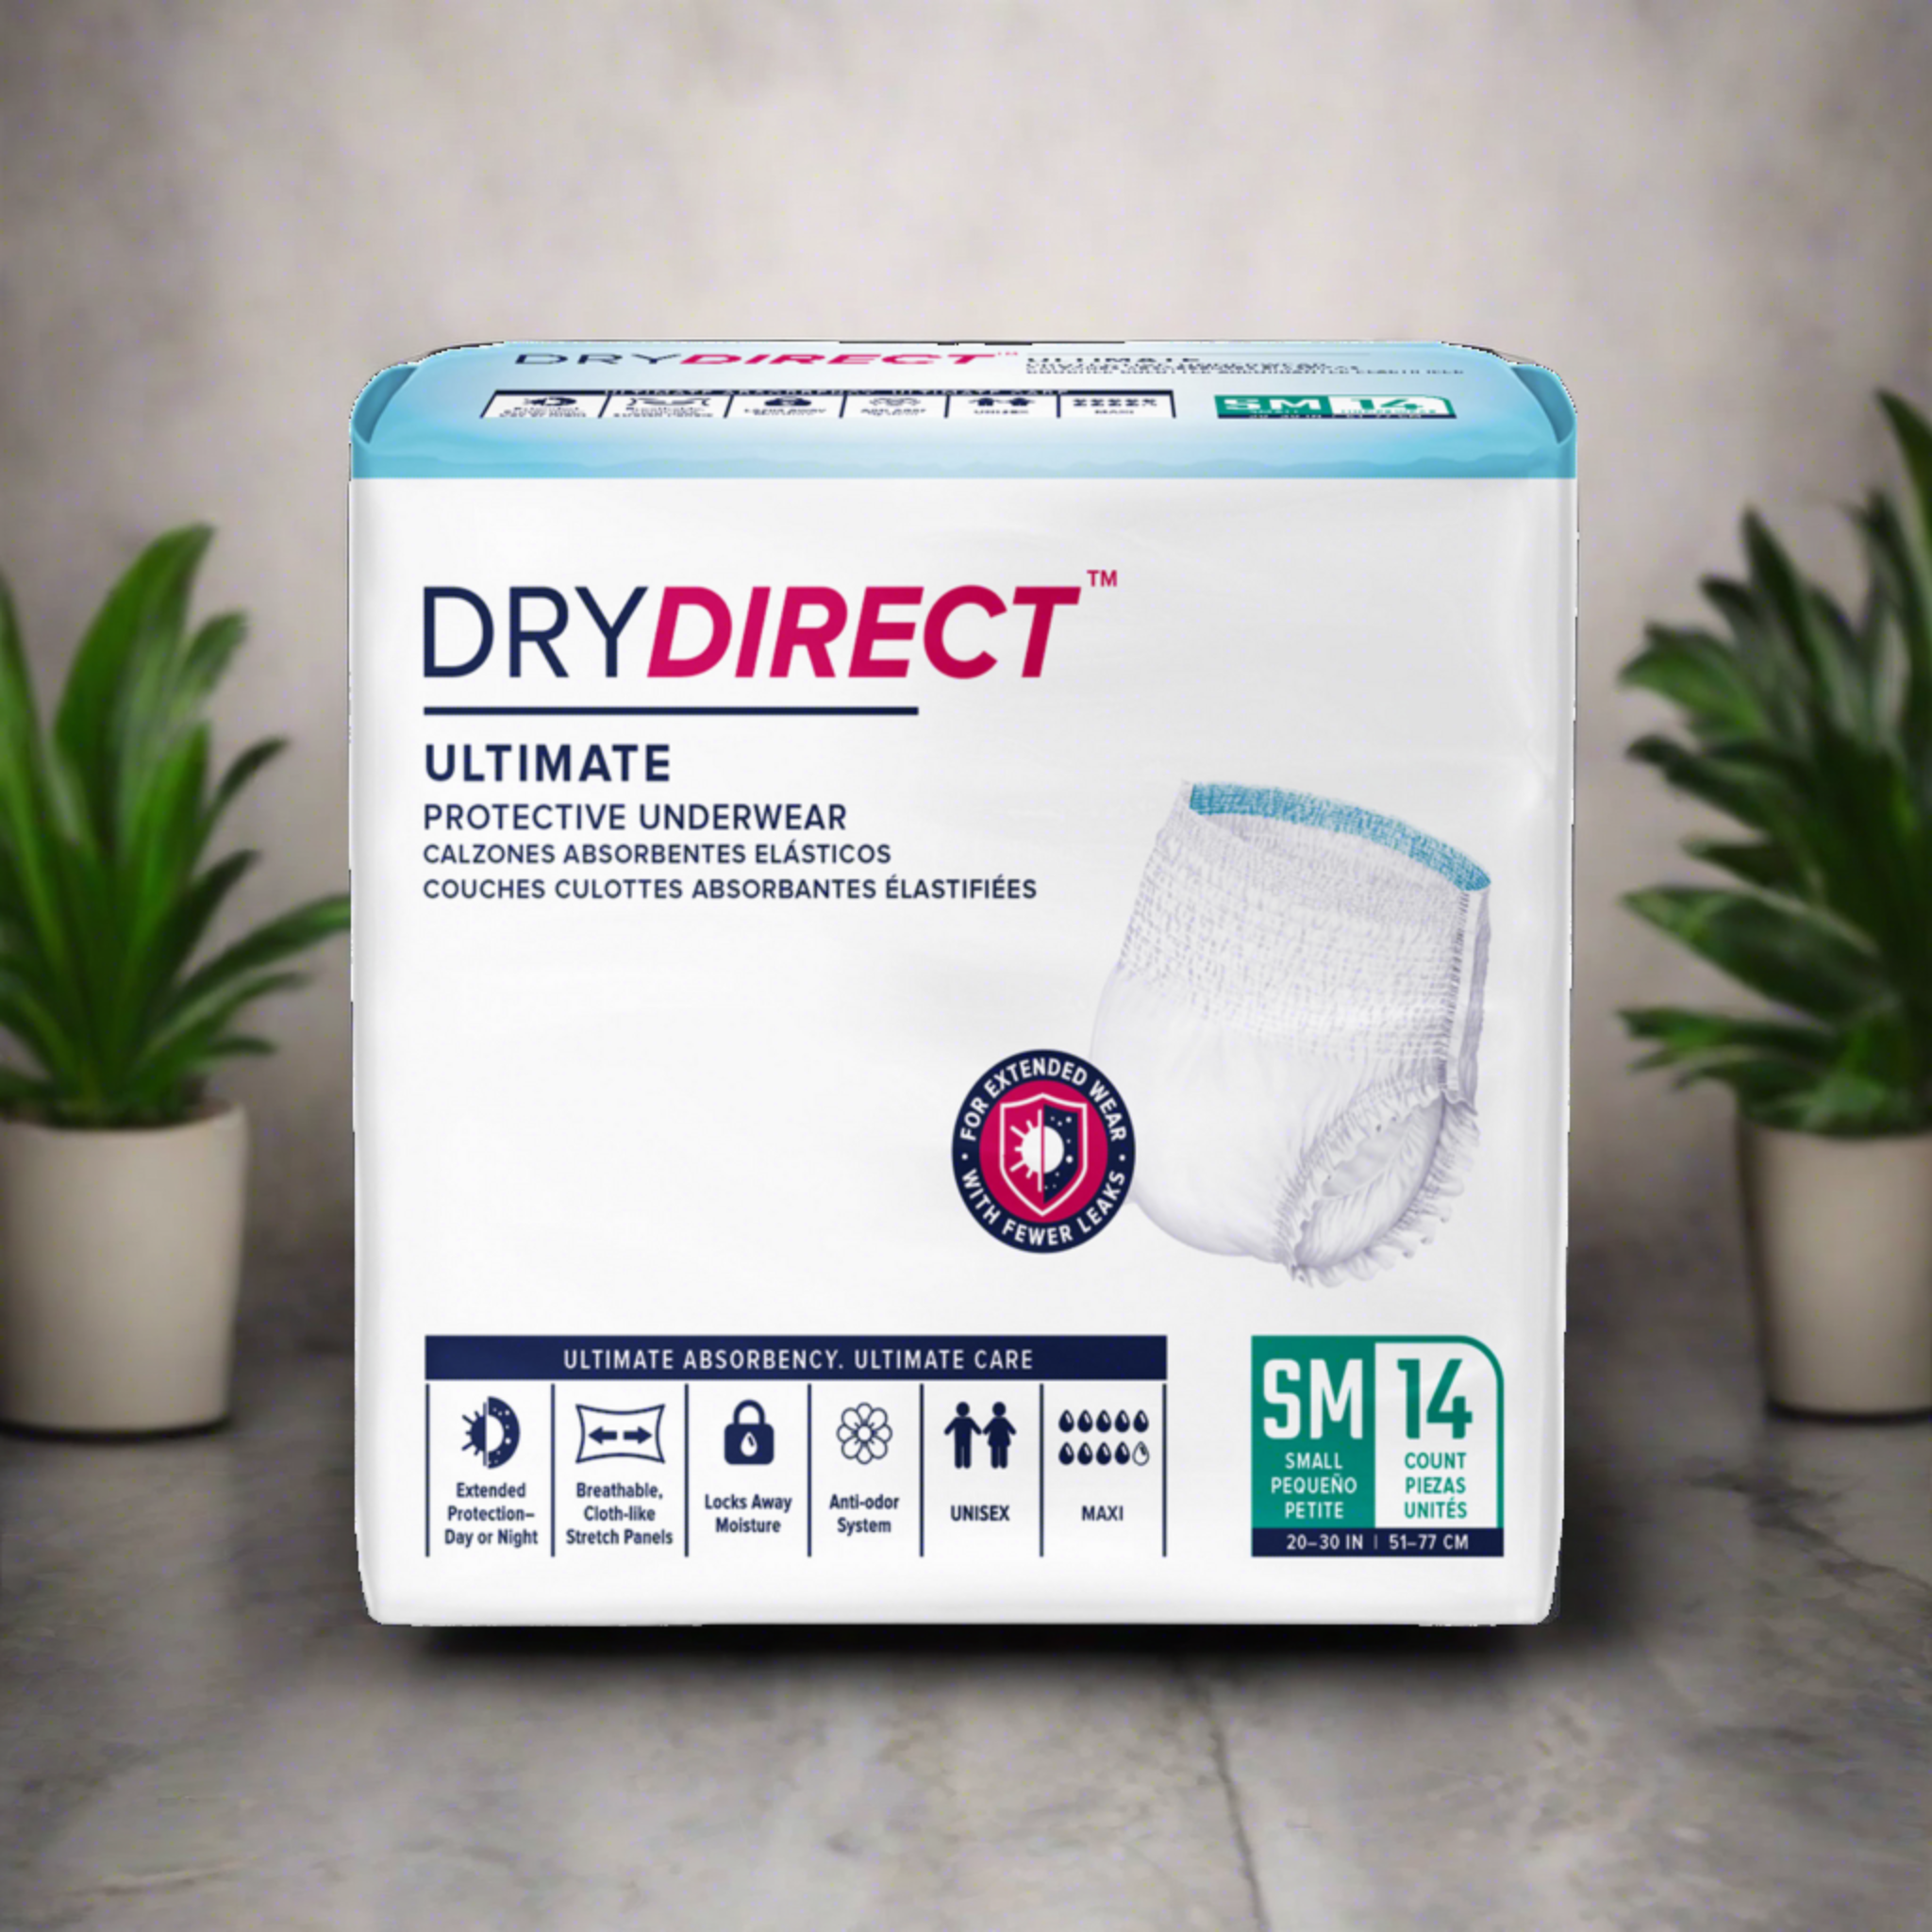 Dry Direct Ultimate Protective Underwear